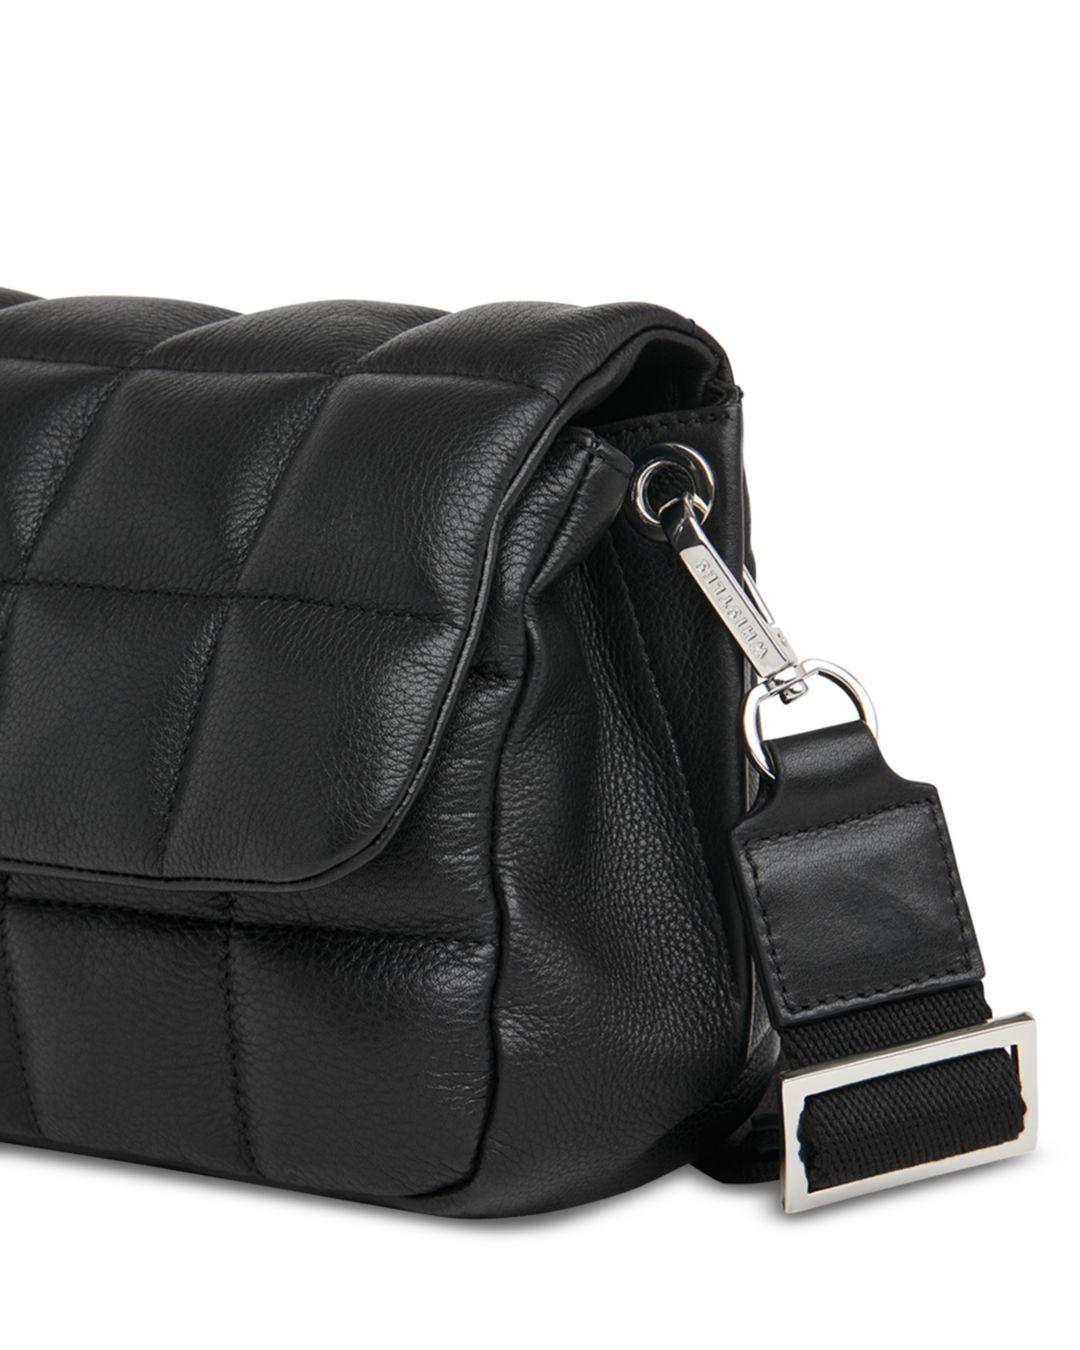 Whistles Ellis Quilted Leather Mini Crossbody Bag in Black | Lyst